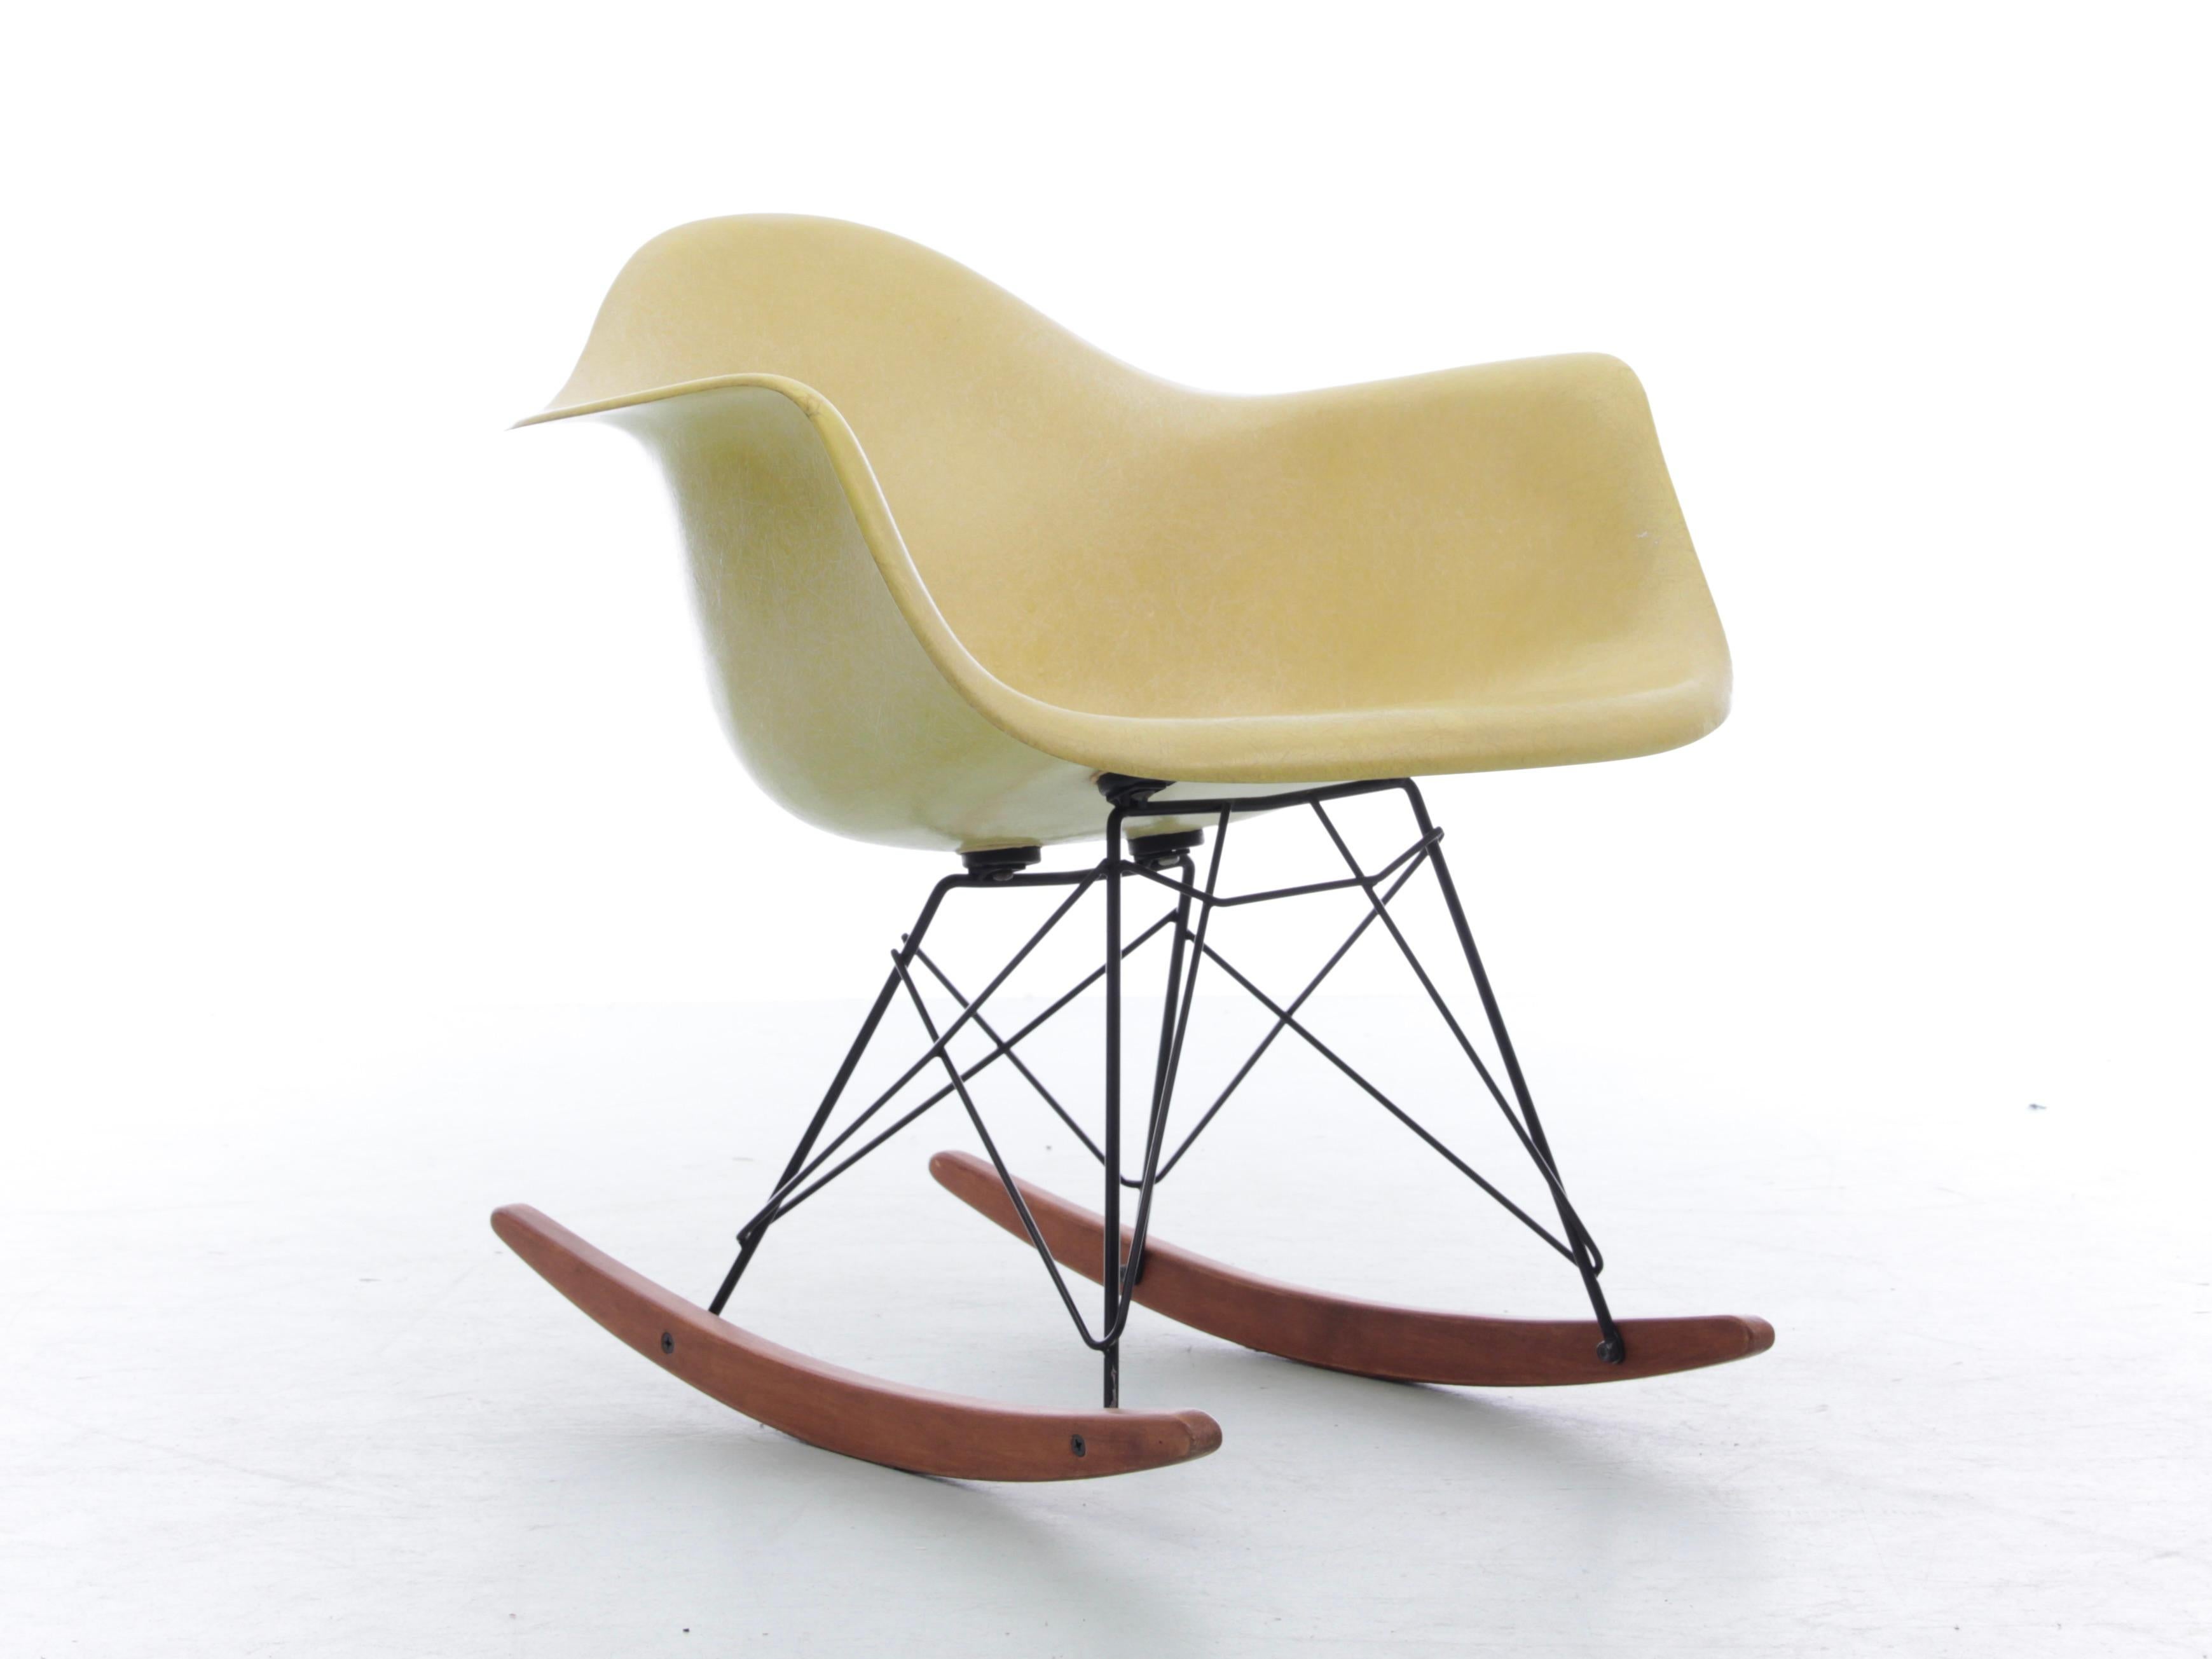 Authentic Armchair RAR (Rocking Arm Chair) shell Eames original and vintage edition Herman Miller Designed by Charles EAMES - 1950

Original fiberglass hull in pale young color. Trace of label under the seat.

Hull in excellent vintage condition.